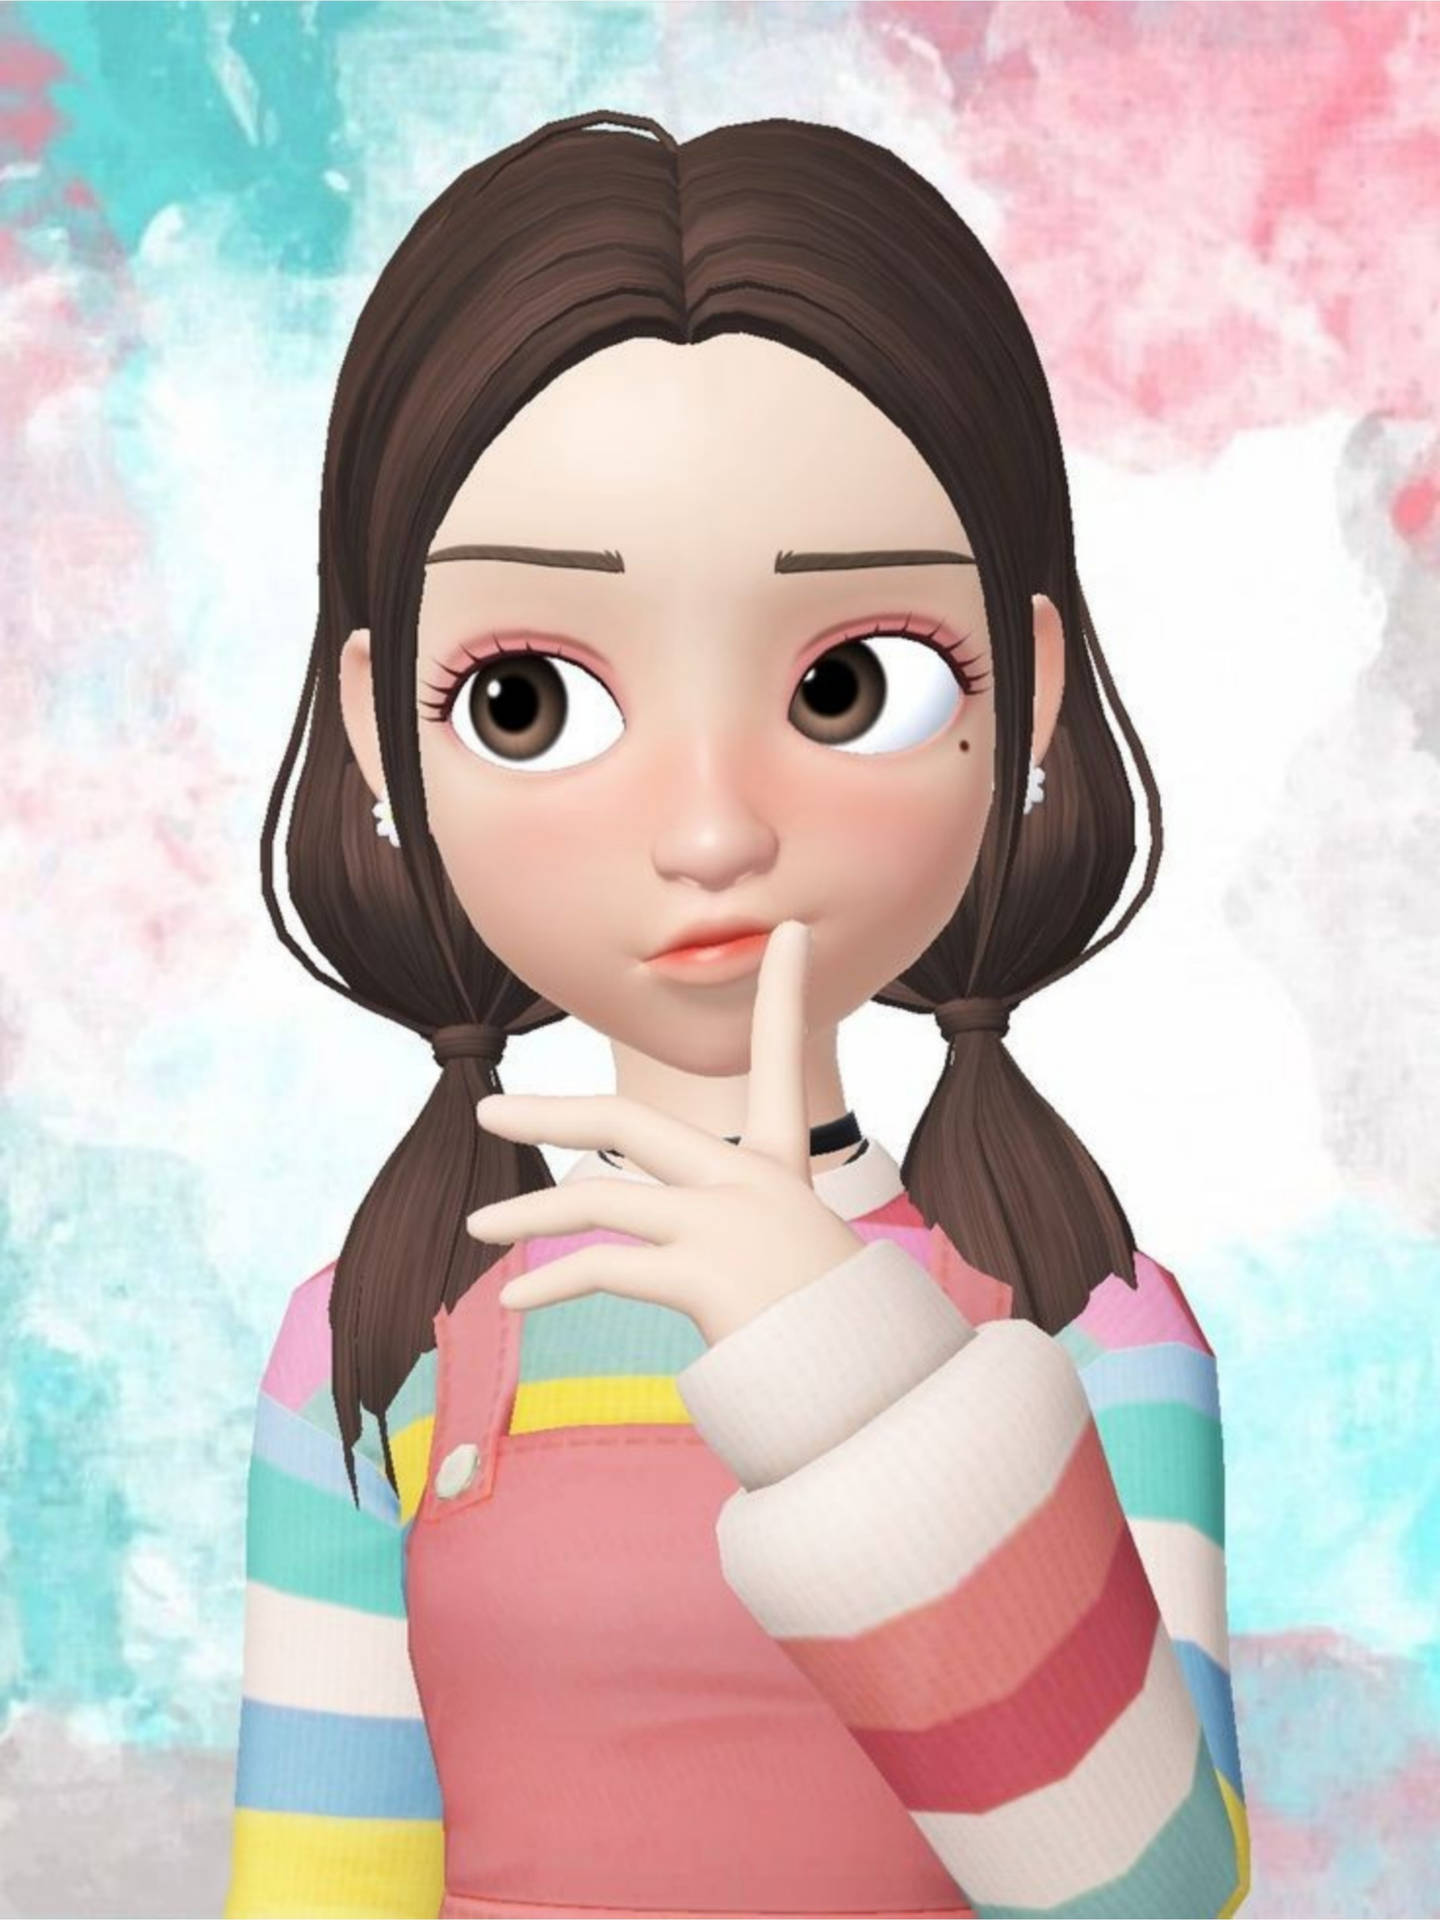 Zepeto Cute Girl With Rainbow Sweater Background